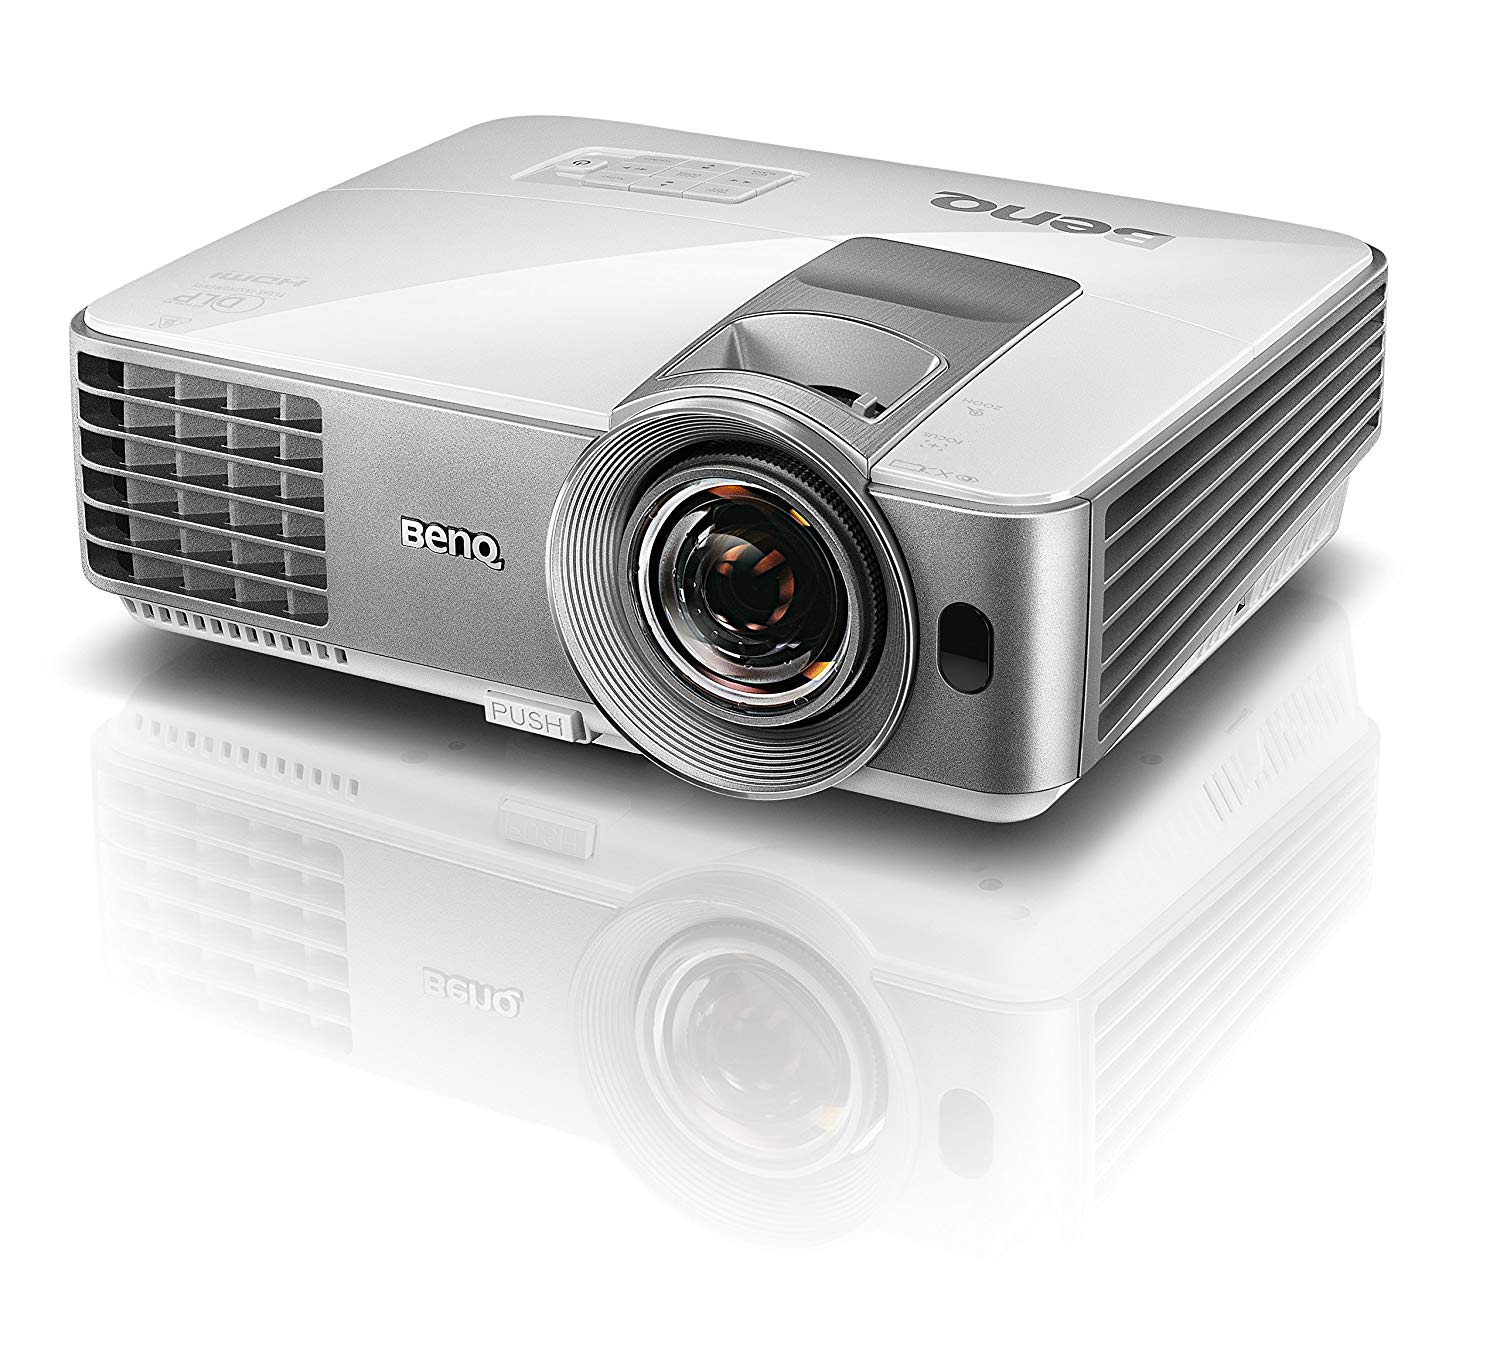 BenQ MS630ST SVGA Short Throw DLP Projector for Business Office, 3200 ANSI Lumens - Silver/White (9HJDY7713E NOB)